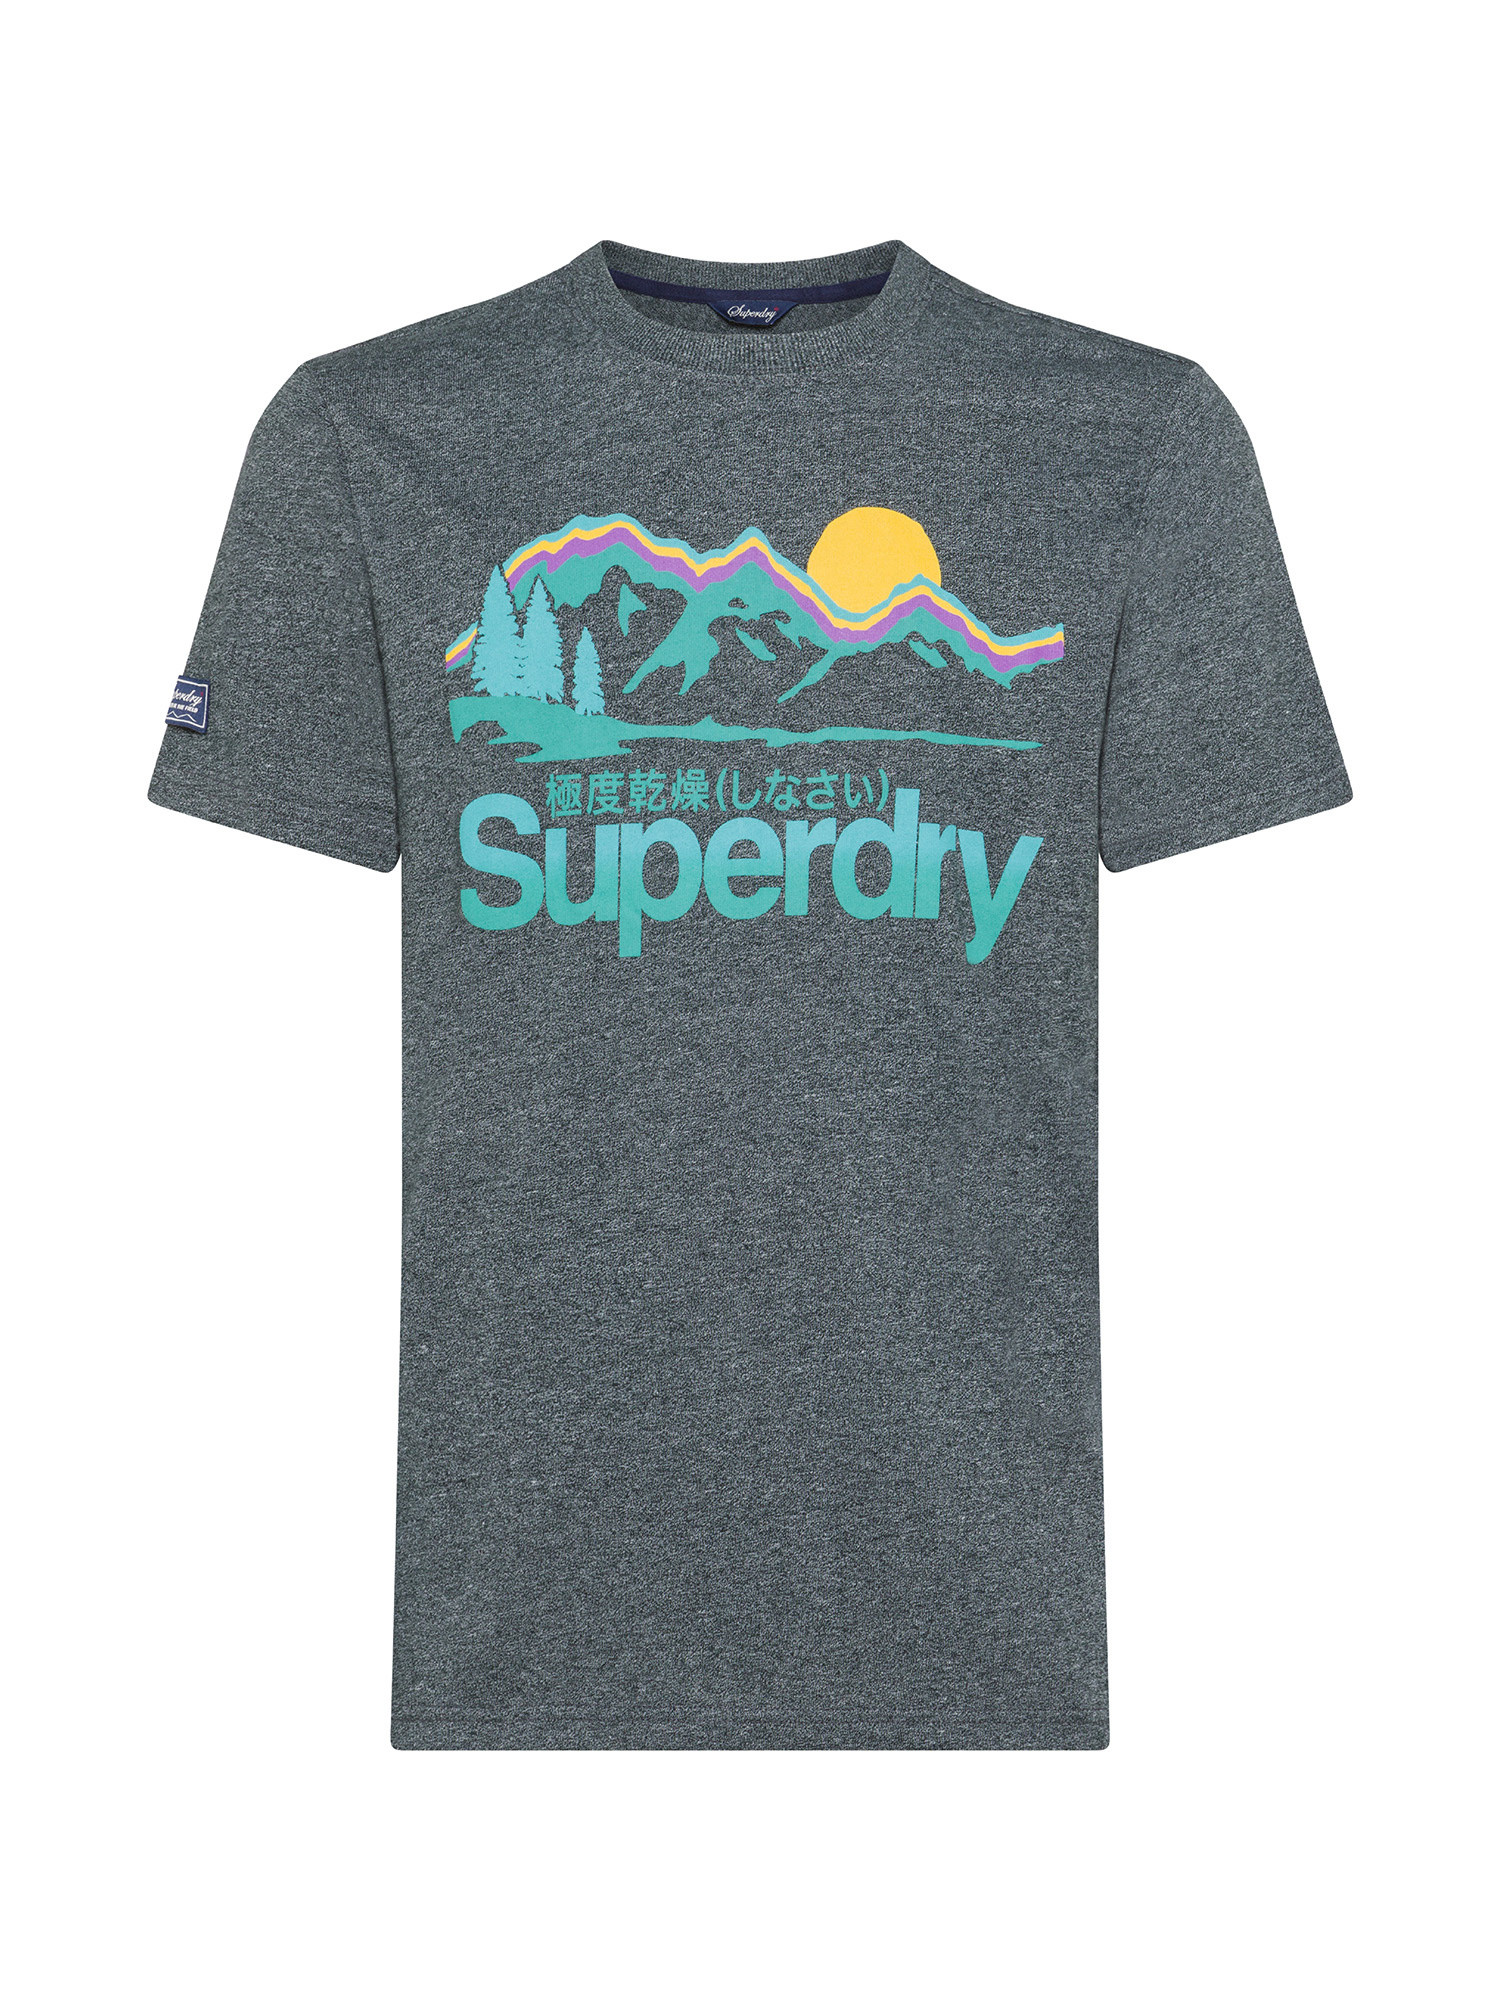 Superdry - T-shirt con stampa, Grigio antracite, large image number 0